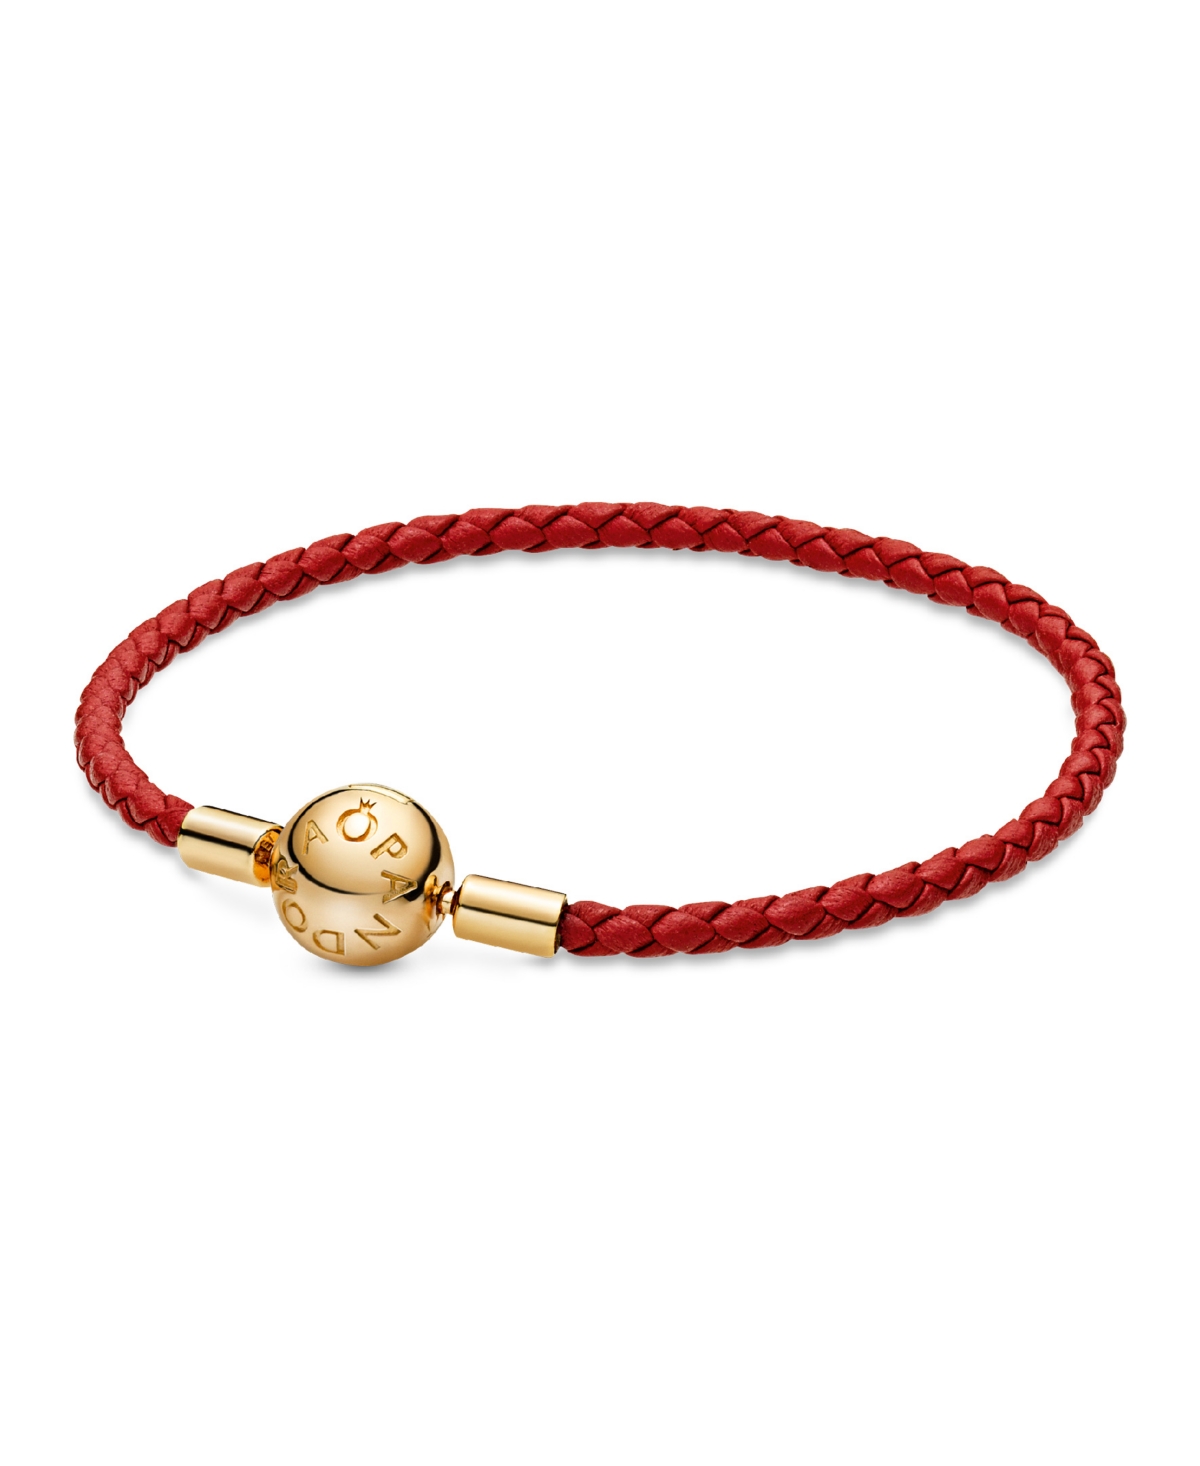 Moments 14K Gold-Plated Red Woven Leather Bracelet - Leather